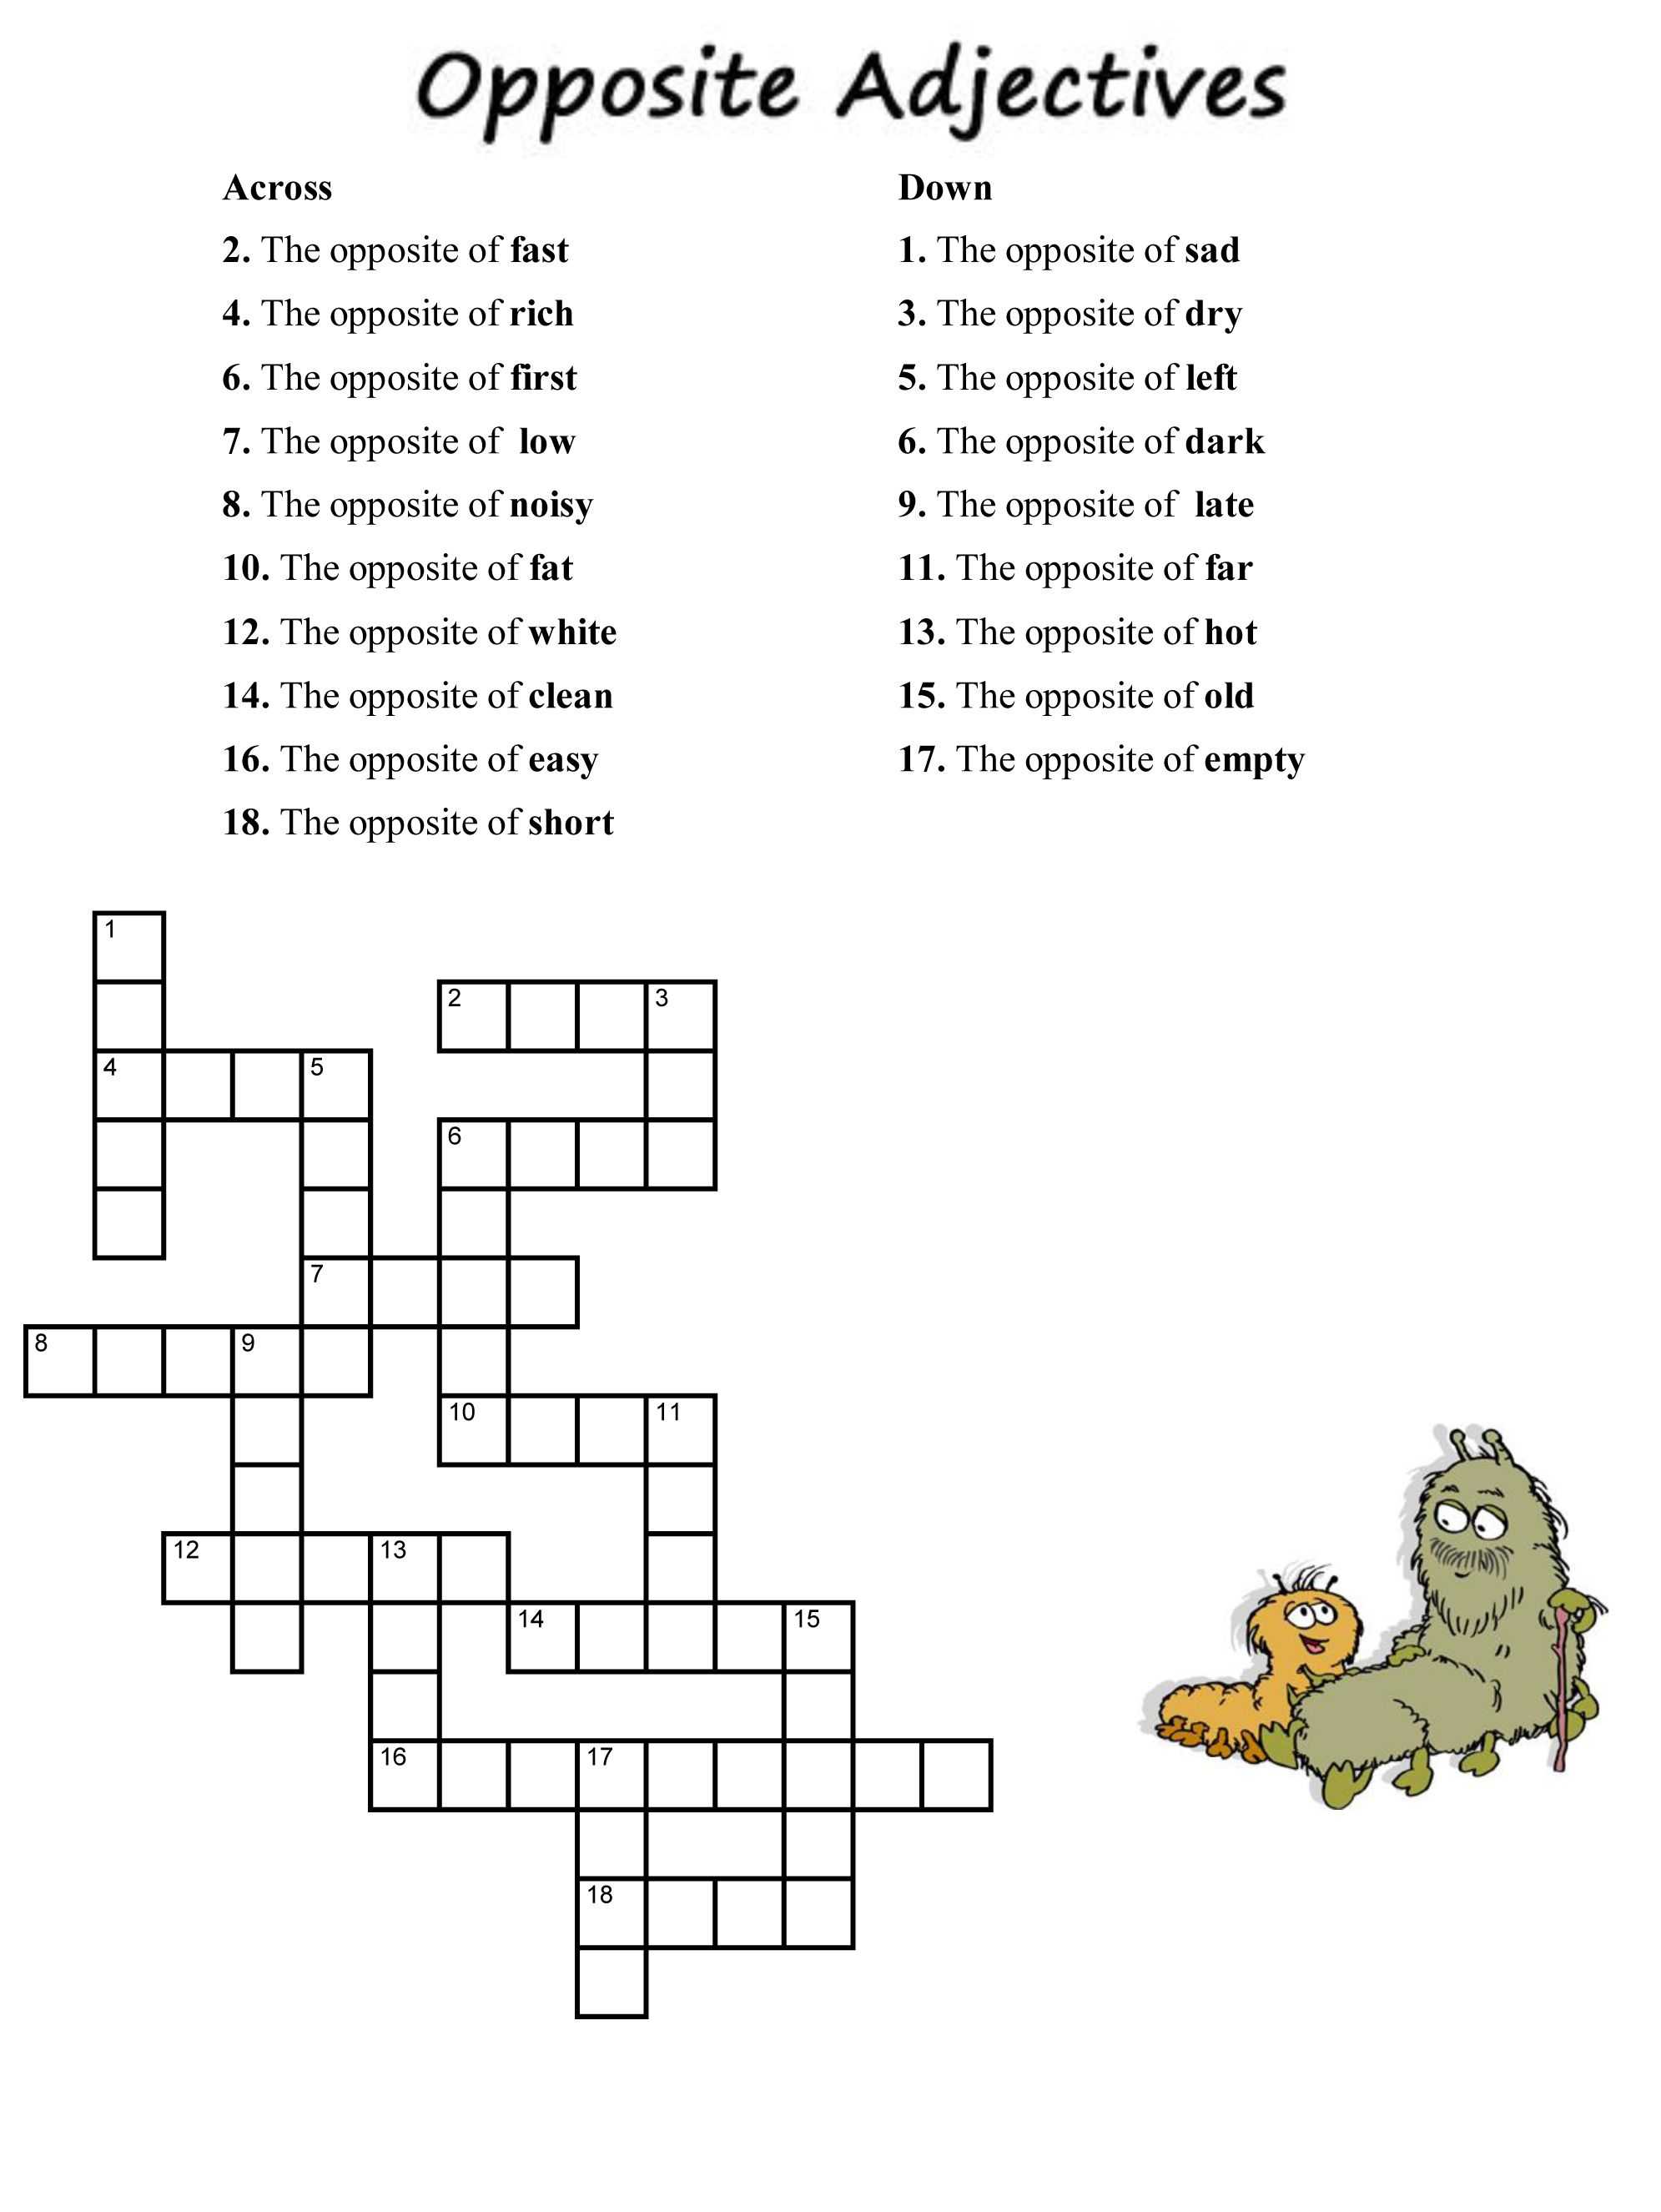 Adjectives Worksheet 3 Spanish Answers as Well as Adjectives Worksheets Crossword